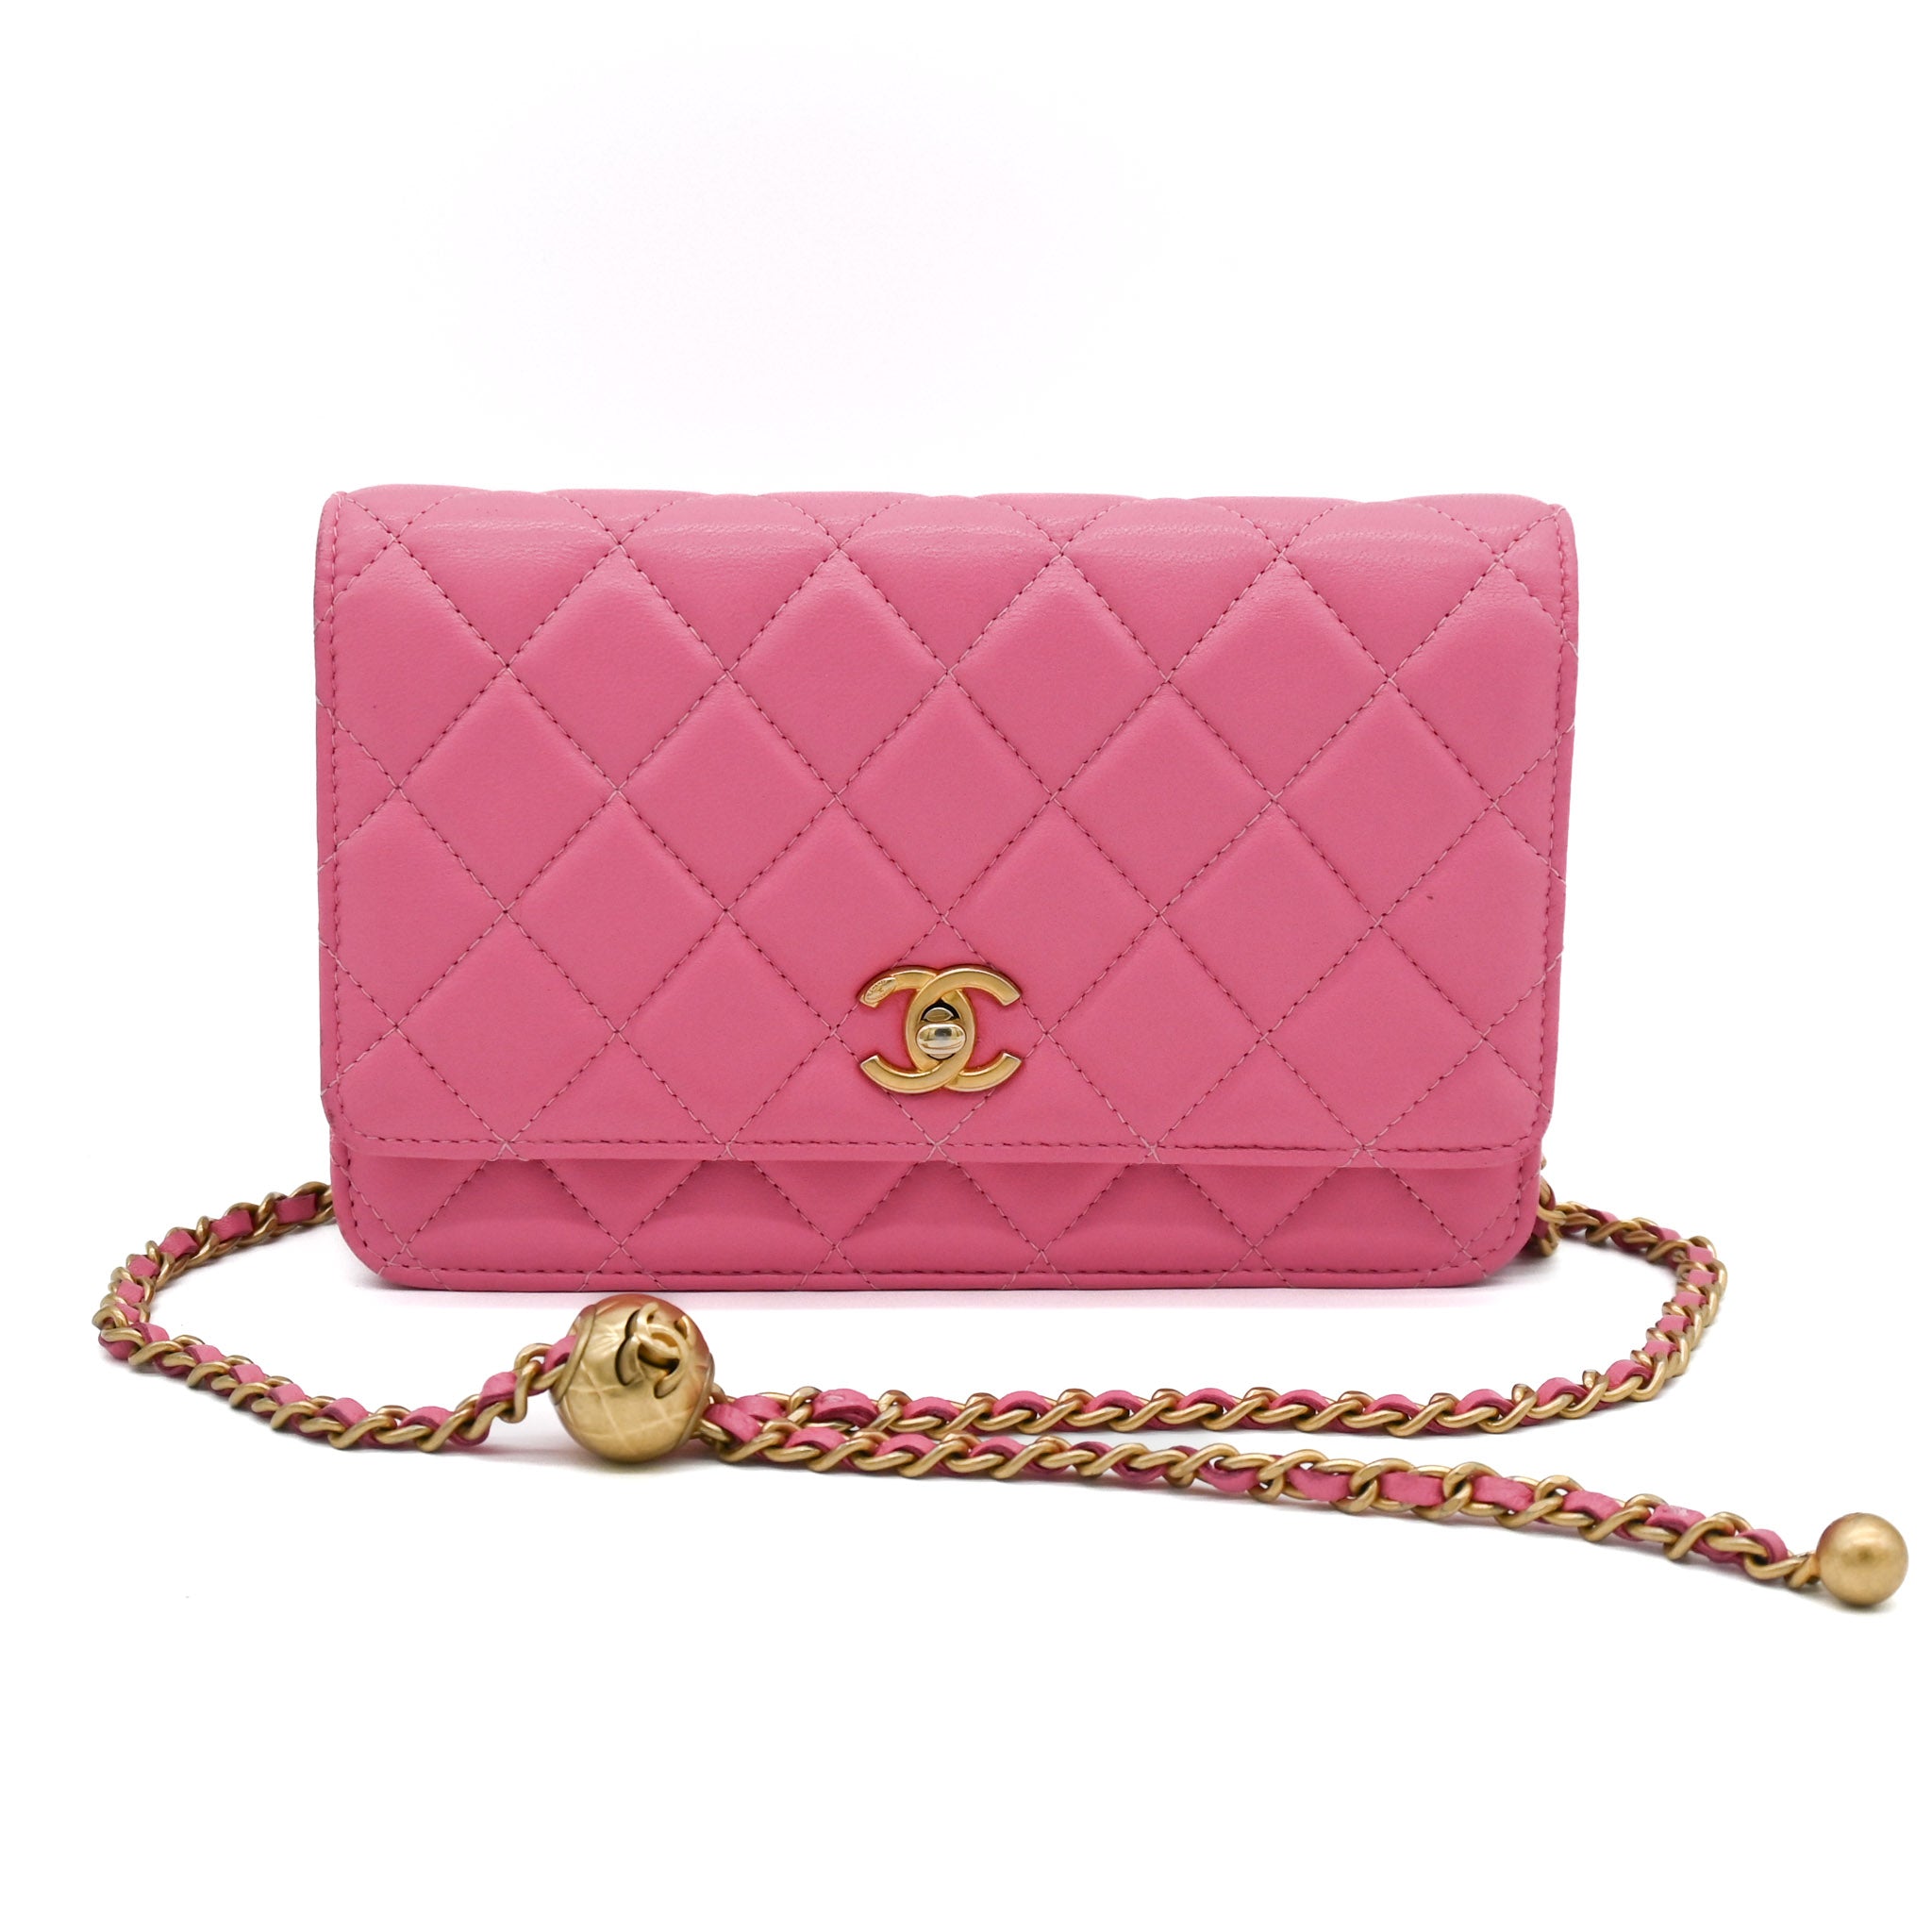 Chanel Pink Pearl Crush Lambskin Crush Wallet on Chain with Gold Hardware - Vault 55 | Authentic Preowned Luxury